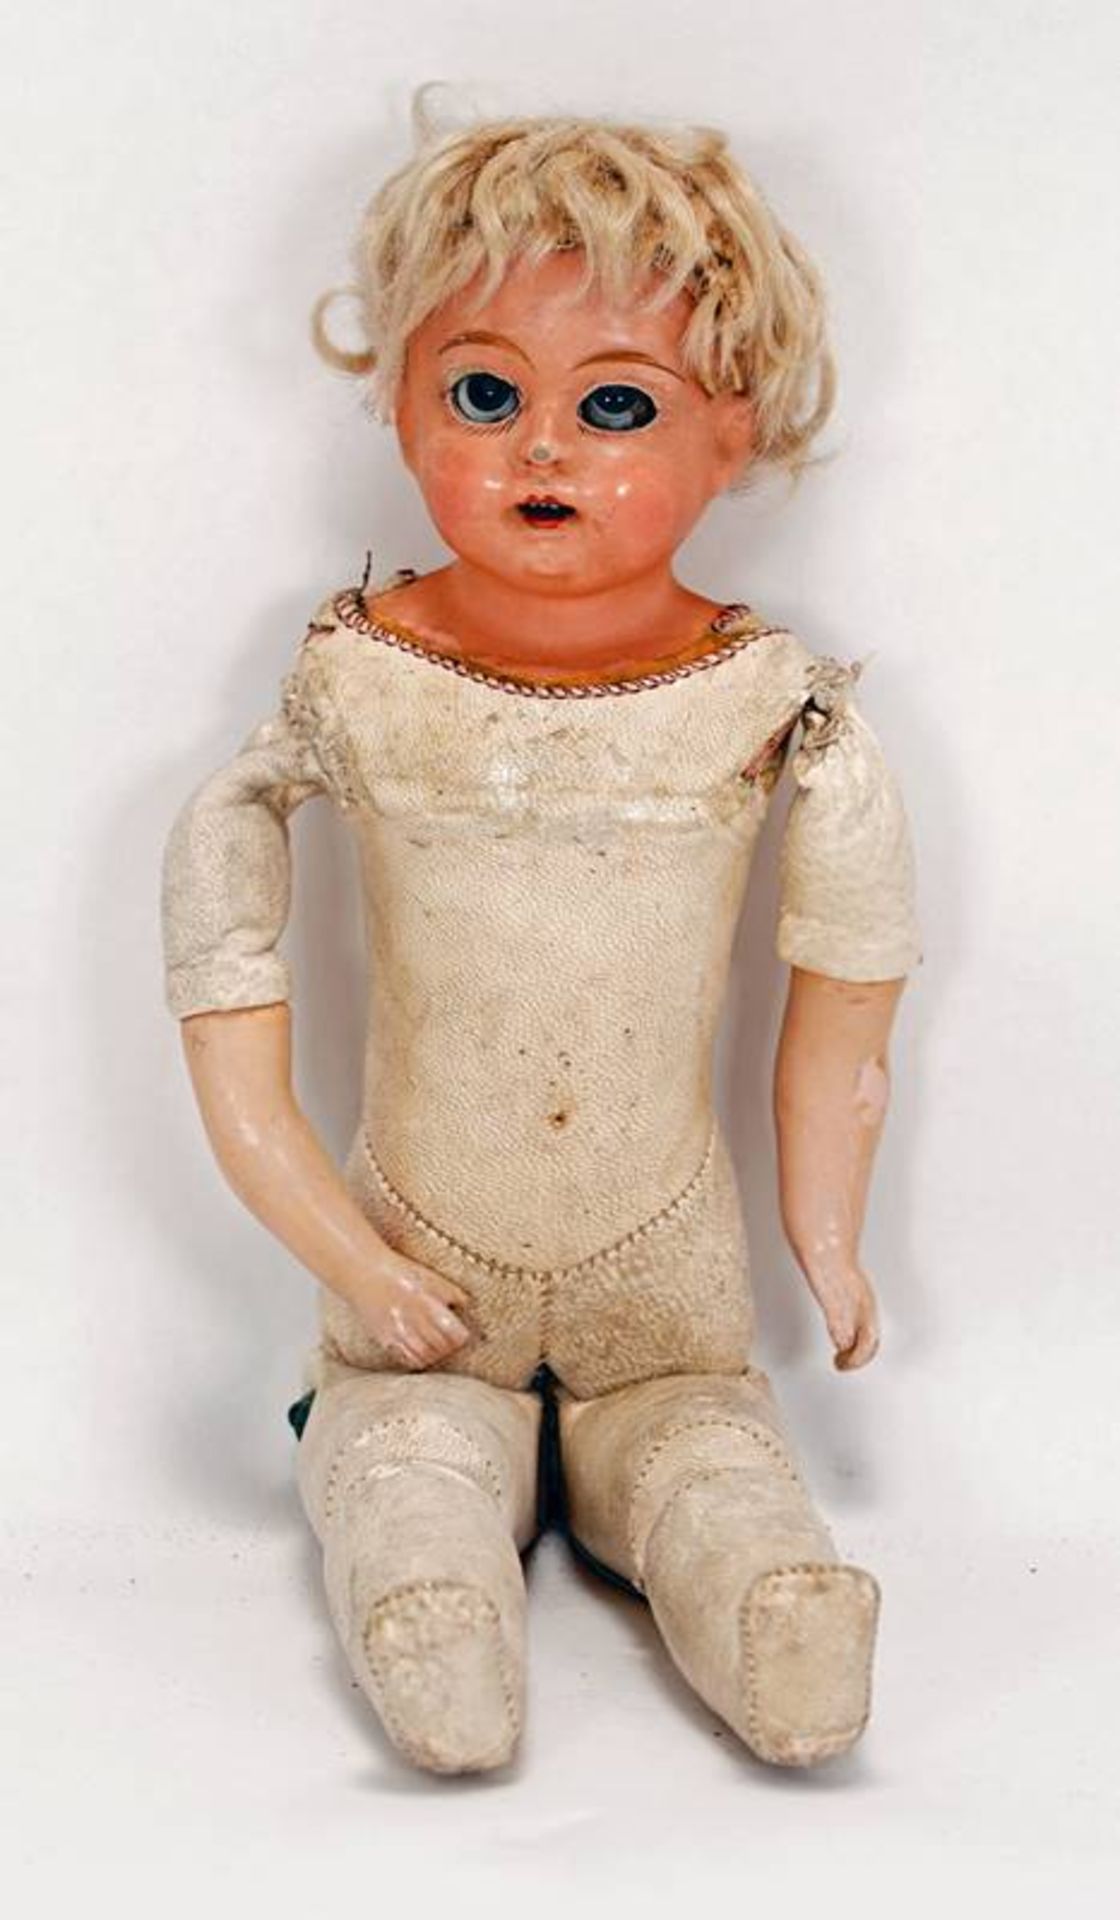 Articulated doll - Image 3 of 5